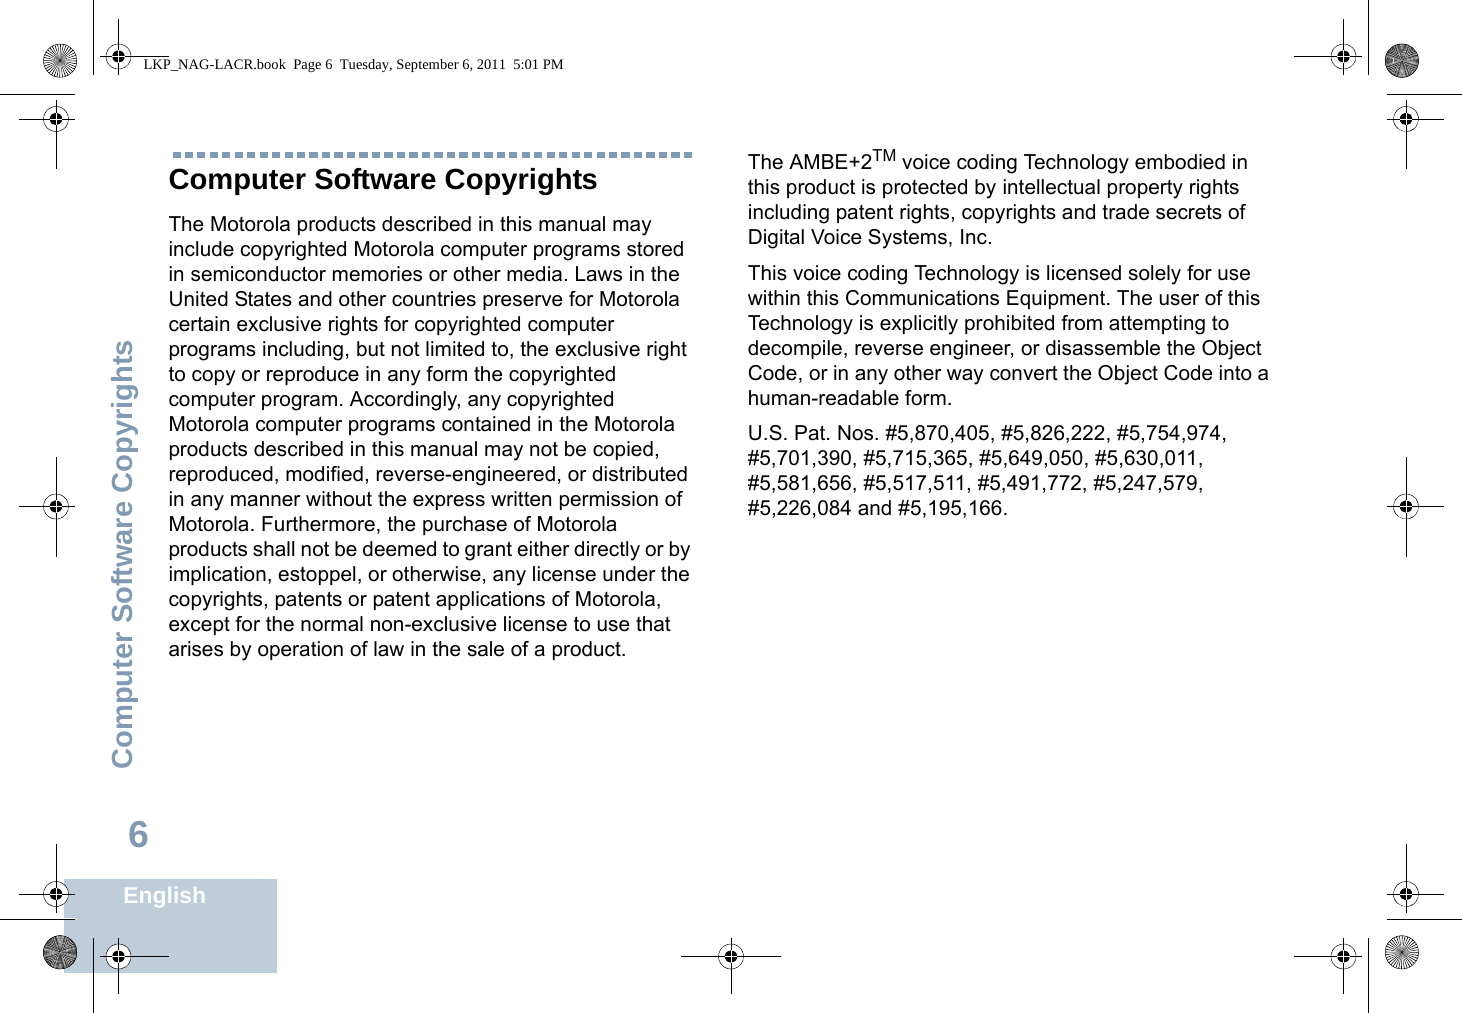 Computer Software CopyrightsEnglish6Computer Software CopyrightsThe Motorola products described in this manual may include copyrighted Motorola computer programs stored in semiconductor memories or other media. Laws in the United States and other countries preserve for Motorola certain exclusive rights for copyrighted computer programs including, but not limited to, the exclusive right to copy or reproduce in any form the copyrighted computer program. Accordingly, any copyrighted Motorola computer programs contained in the Motorola products described in this manual may not be copied, reproduced, modified, reverse-engineered, or distributed in any manner without the express written permission of Motorola. Furthermore, the purchase of Motorola products shall not be deemed to grant either directly or by implication, estoppel, or otherwise, any license under the copyrights, patents or patent applications of Motorola, except for the normal non-exclusive license to use that arises by operation of law in the sale of a product.The AMBE+2TM voice coding Technology embodied in this product is protected by intellectual property rights including patent rights, copyrights and trade secrets of Digital Voice Systems, Inc. This voice coding Technology is licensed solely for use within this Communications Equipment. The user of this Technology is explicitly prohibited from attempting to decompile, reverse engineer, or disassemble the Object Code, or in any other way convert the Object Code into a human-readable form. U.S. Pat. Nos. #5,870,405, #5,826,222, #5,754,974, #5,701,390, #5,715,365, #5,649,050, #5,630,011, #5,581,656, #5,517,511, #5,491,772, #5,247,579, #5,226,084 and #5,195,166.LKP_NAG-LACR.book  Page 6  Tuesday, September 6, 2011  5:01 PM